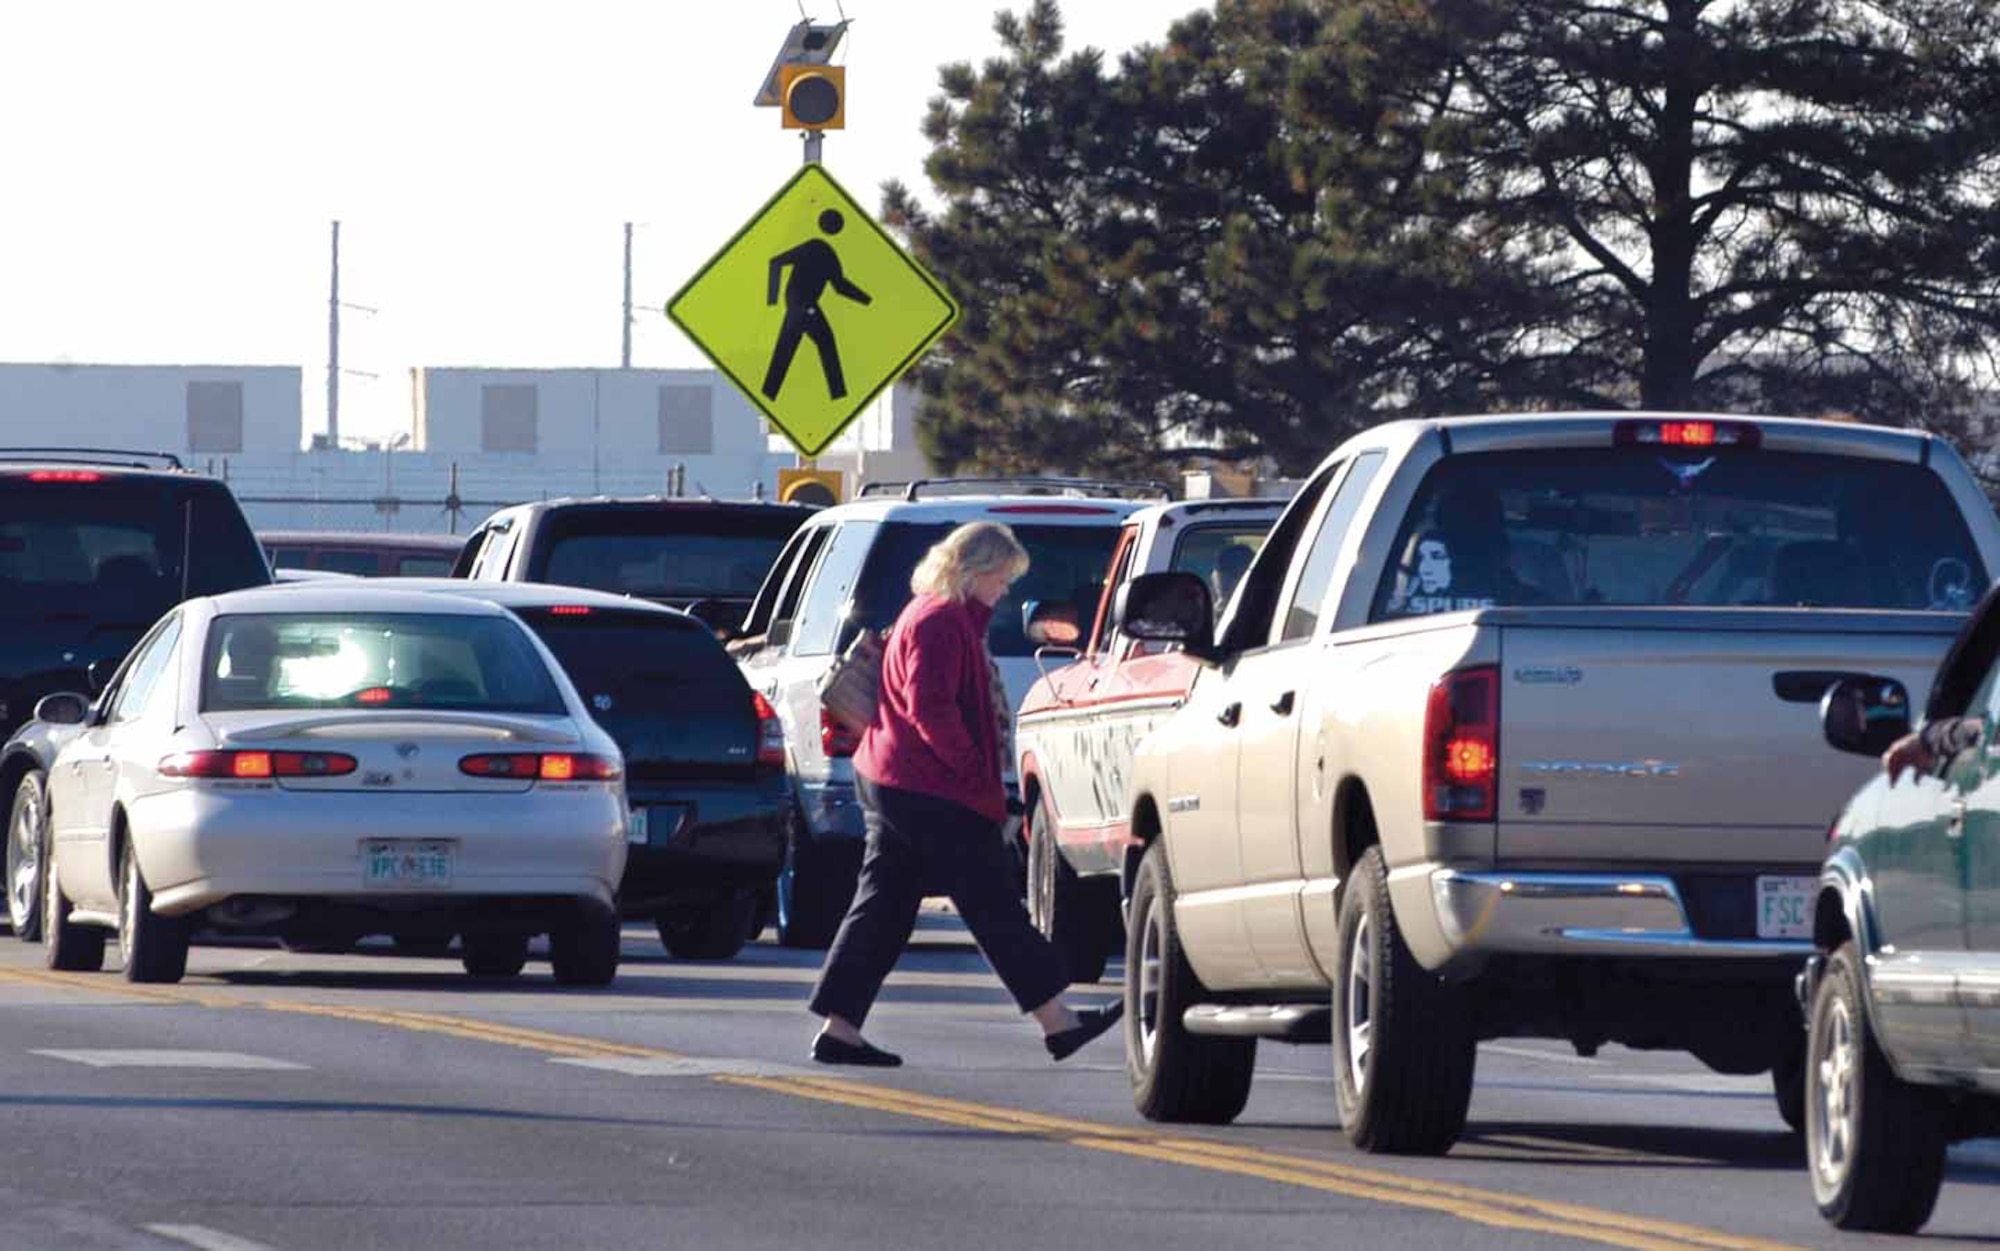 Pedestrians have the right-of-way when crossing roads in designated crosswalks, but those crossing need to be sure drivers see them before stepping into the street. (Air Force photo by Margo Wright)